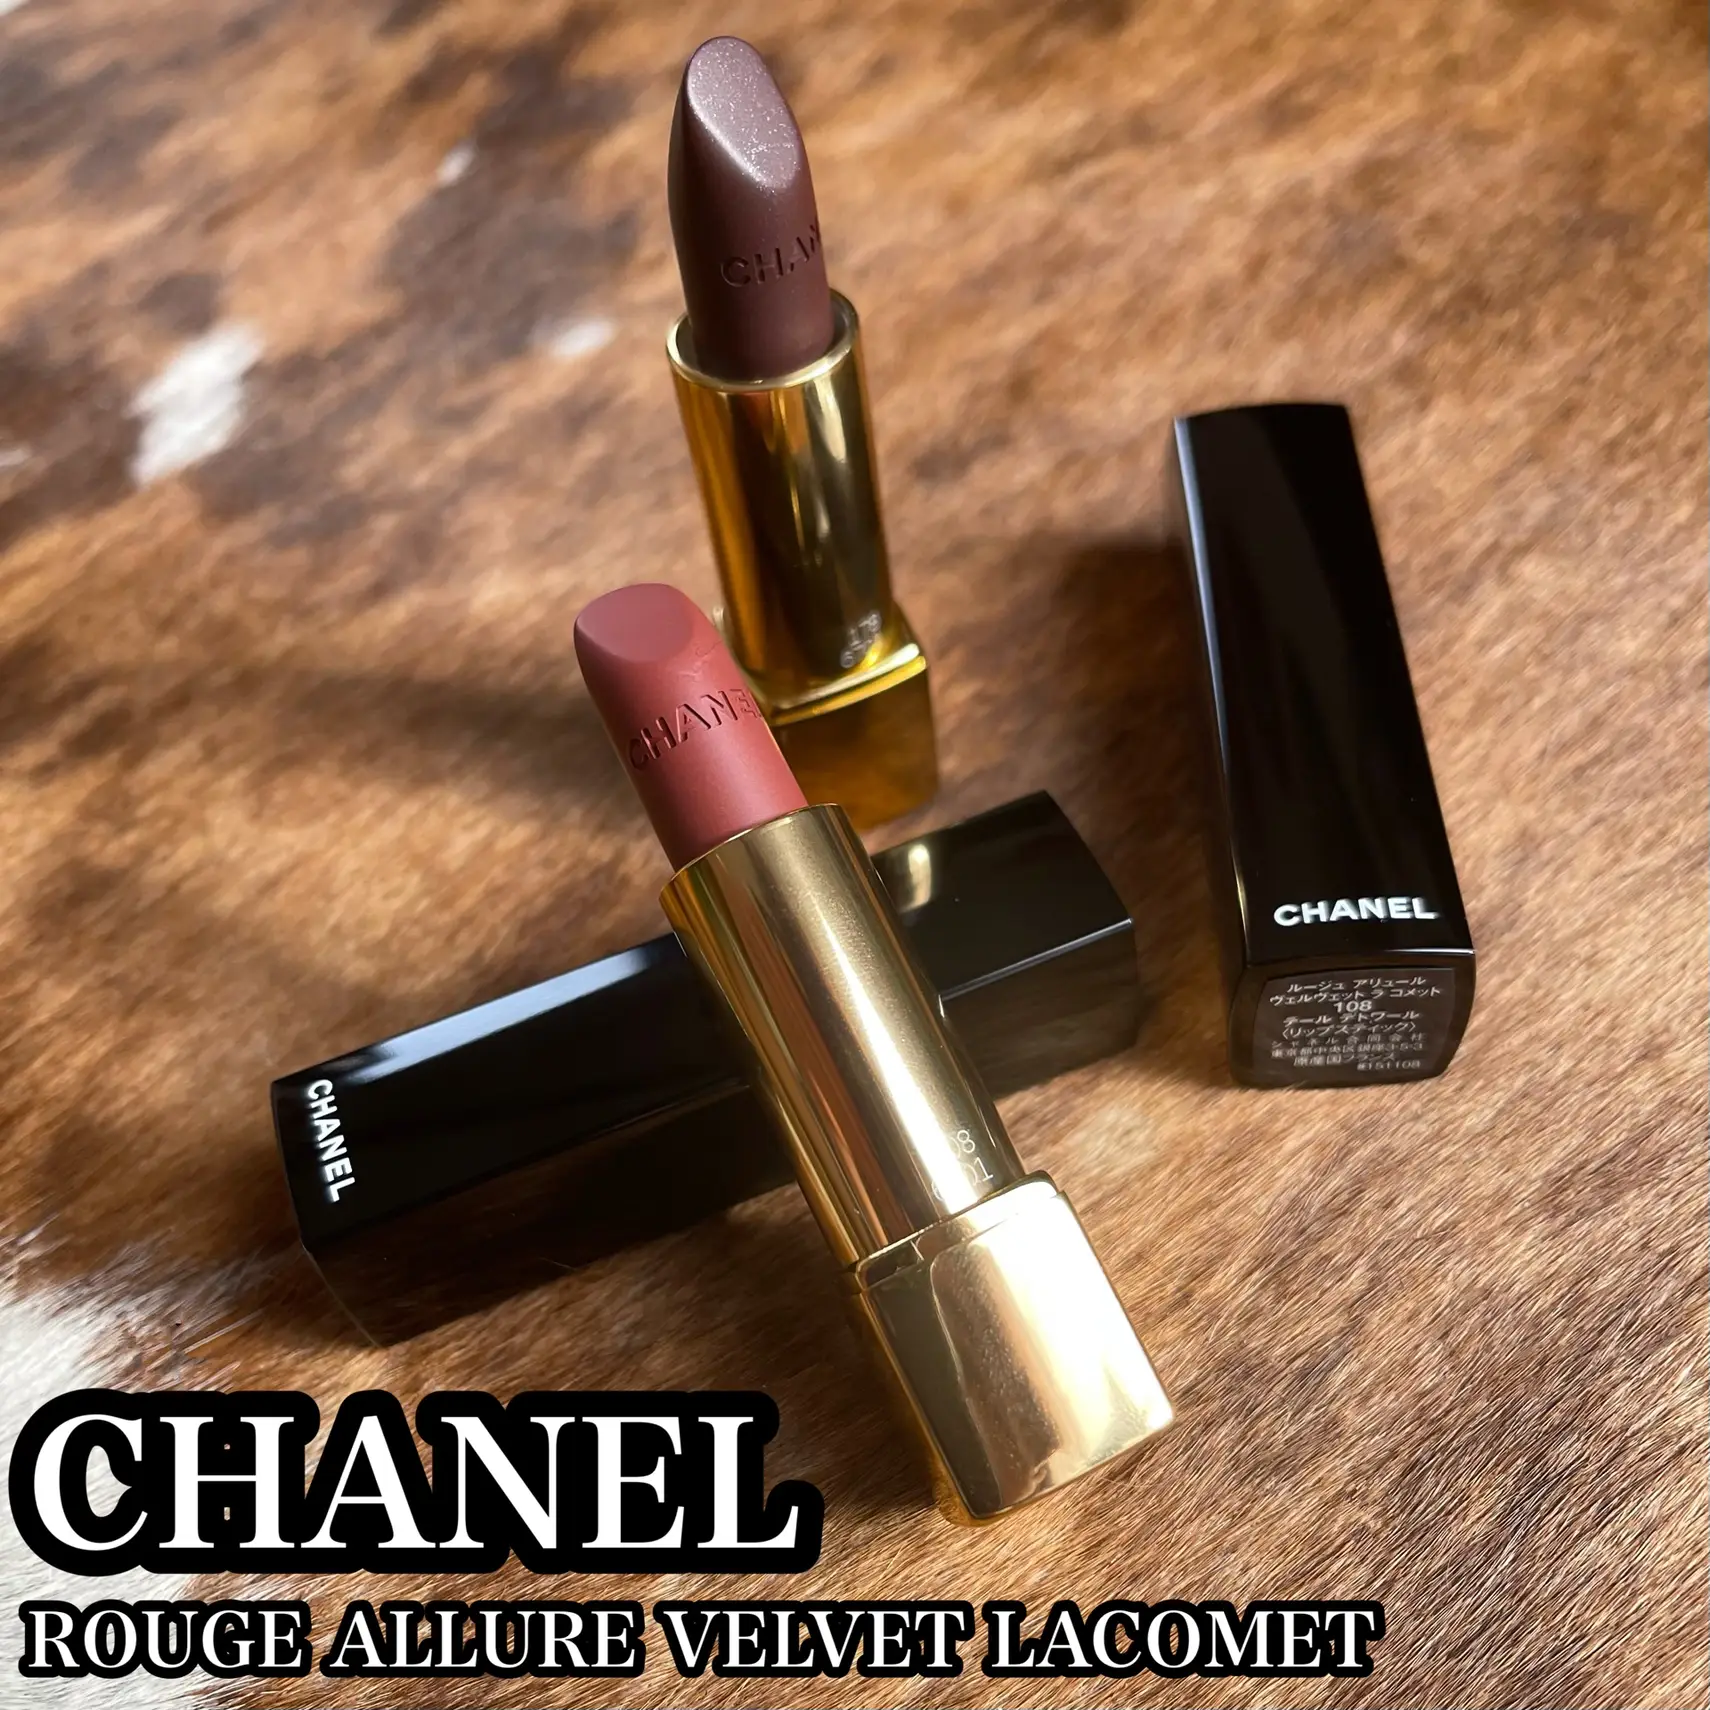 Chanel Rouge Allure Lipstick - The Latest Fall 2022 Lipstick Collection 